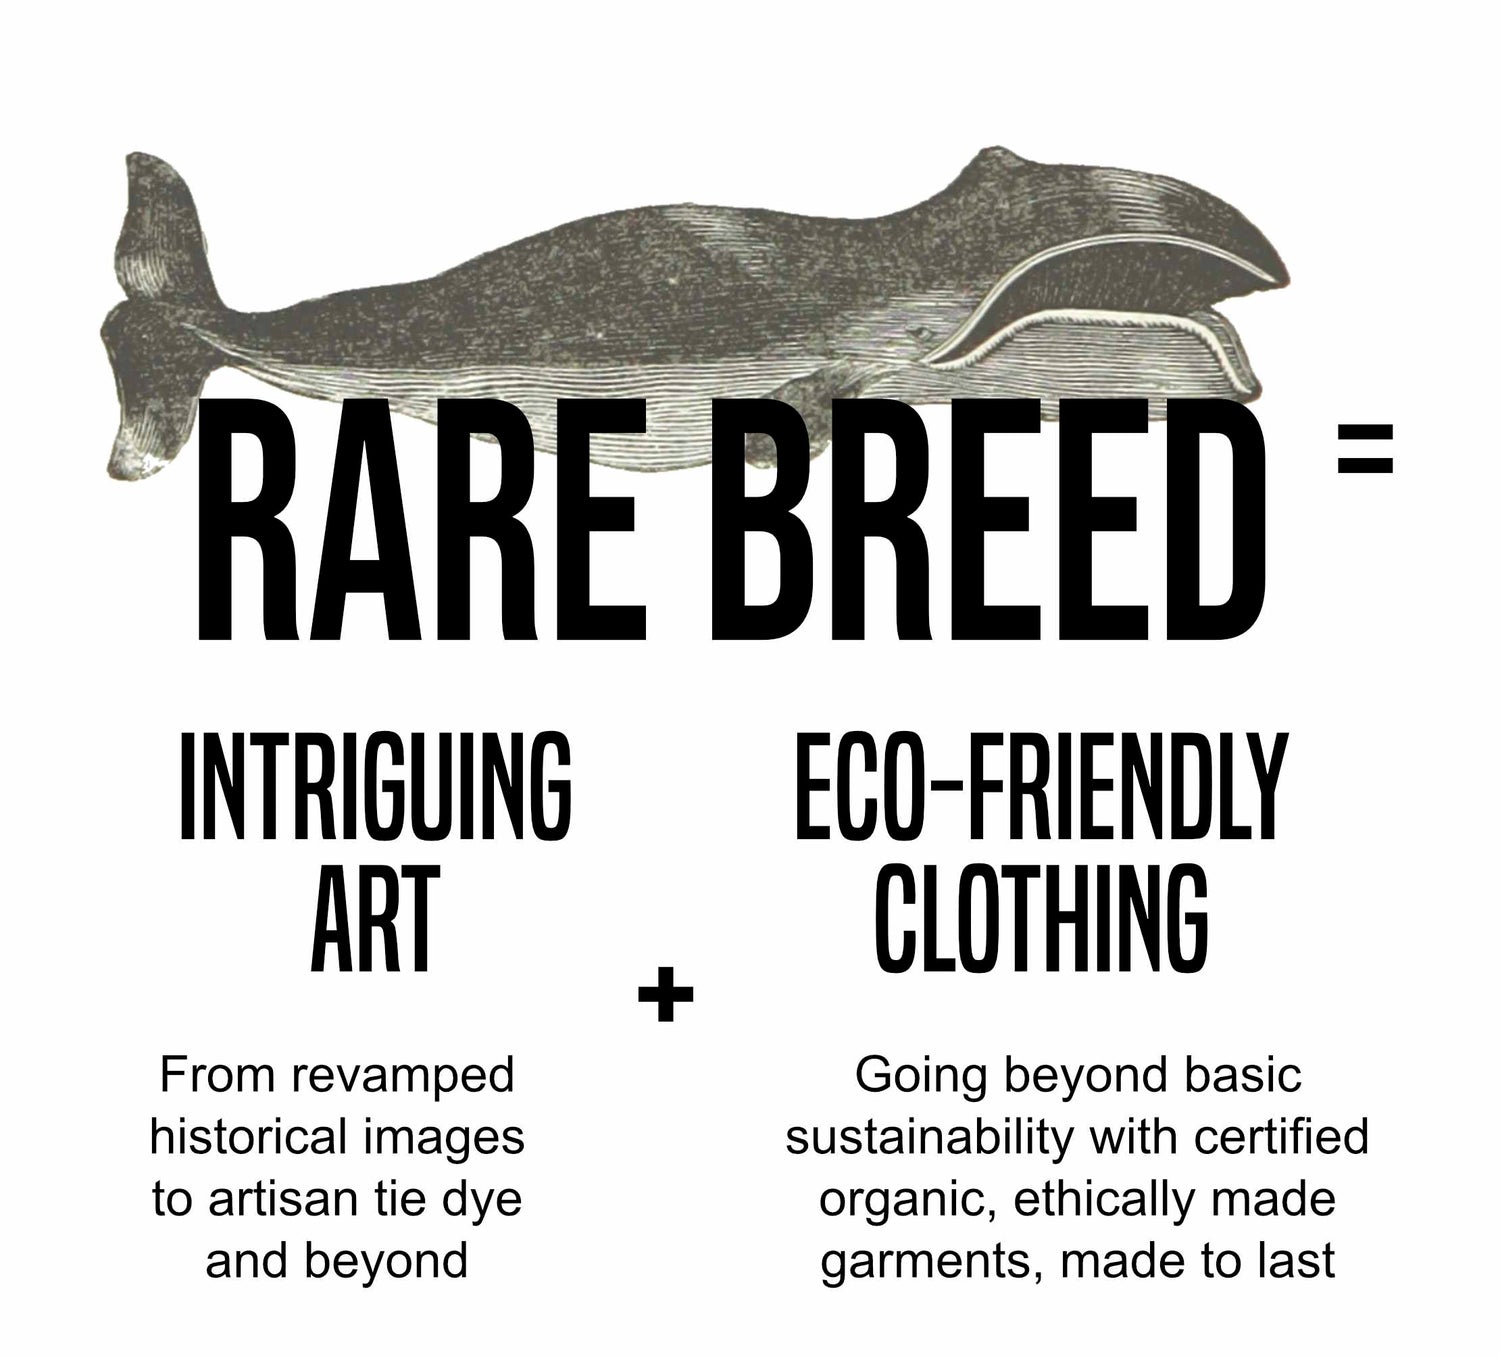 Canadian eco-friendly clothing brand Rare Breed Organic Apparel is a combination of  intriguing art (from revamped historical images to artisan tie dye and beyond) + eco-friendly clothing which goes beyond basic sustainability with certified organic, ethically made garments, made to last.